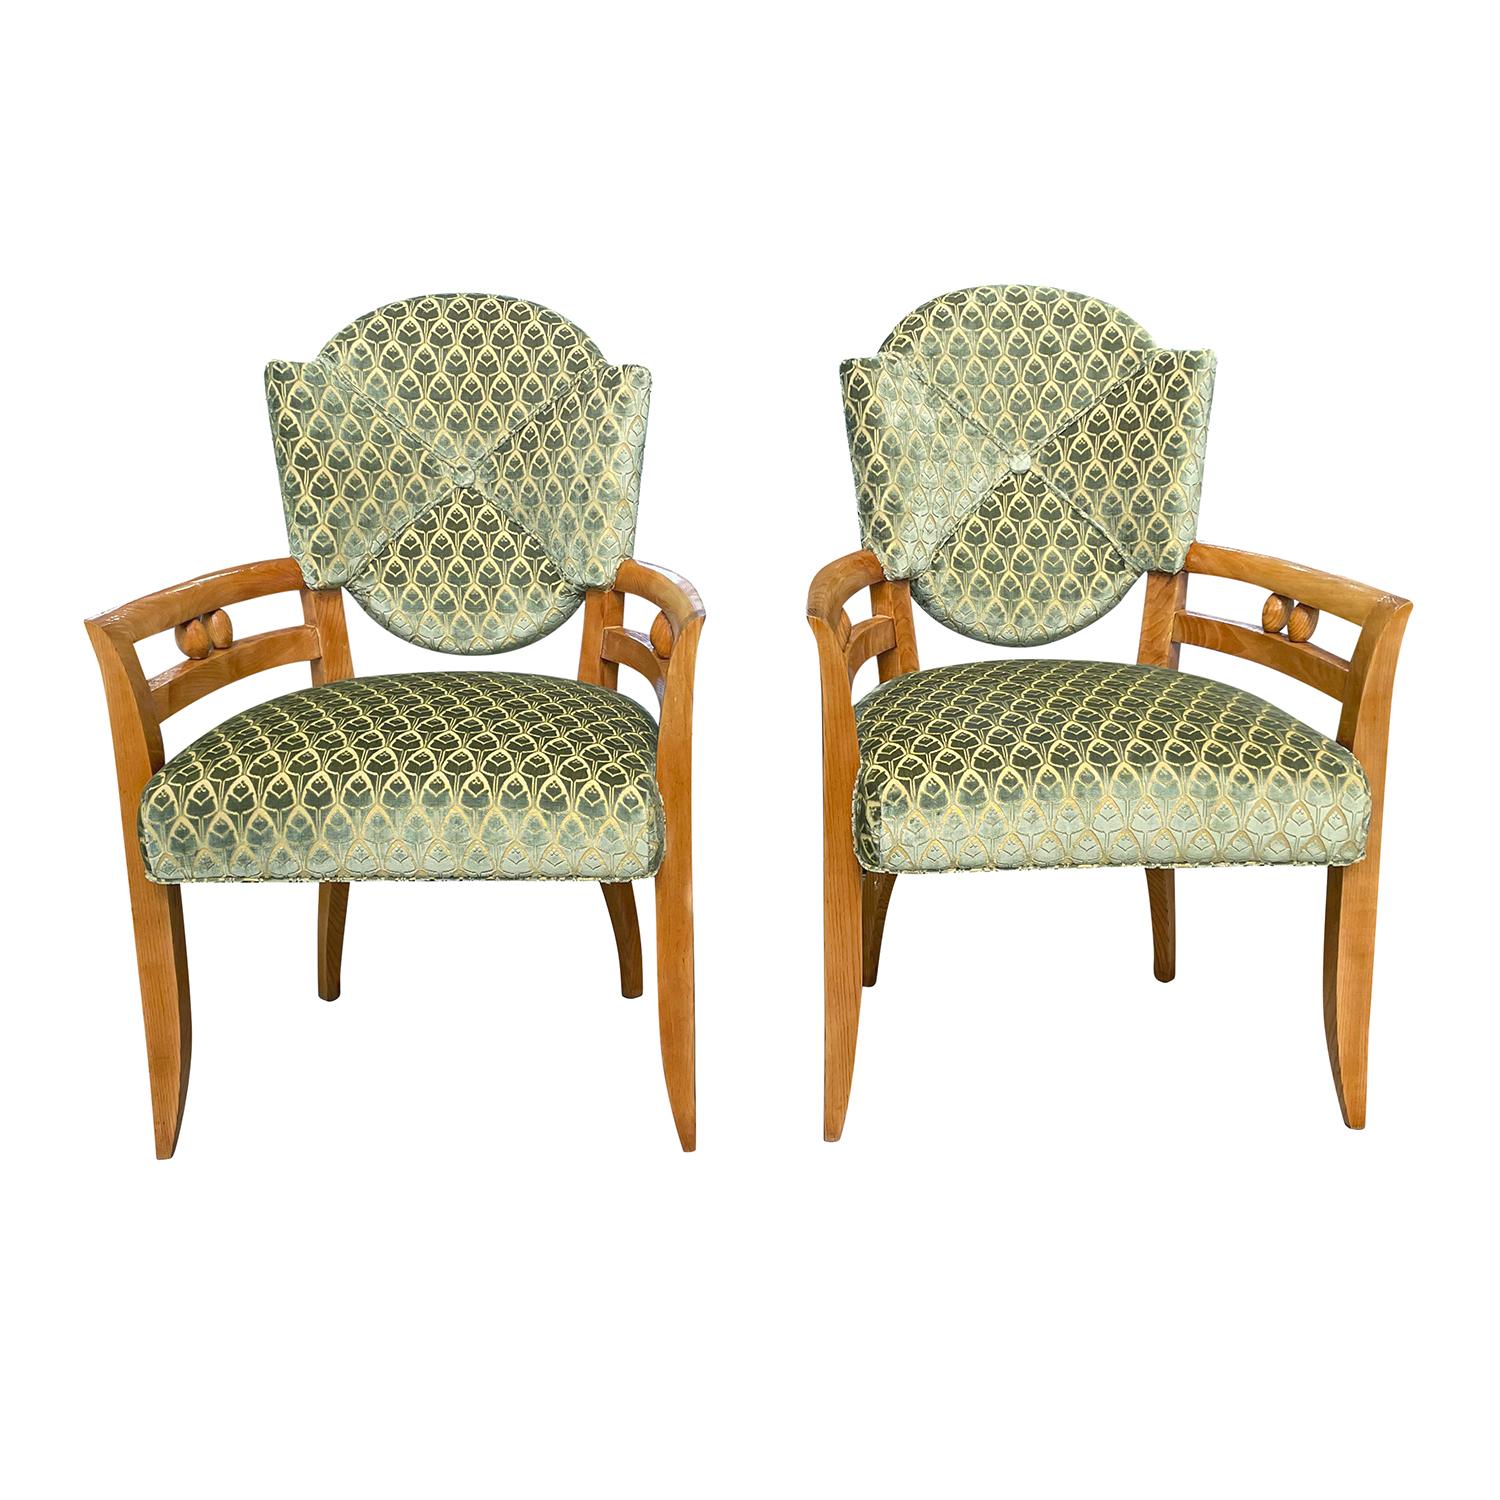 A vintage French Art Deco pair of armchairs made of hand crafted shellac polished Oakwood, designed and produced by André Arbus in good condition. The detailed dining room chairs have a slightly inclined, padded backrest with slim outstretched